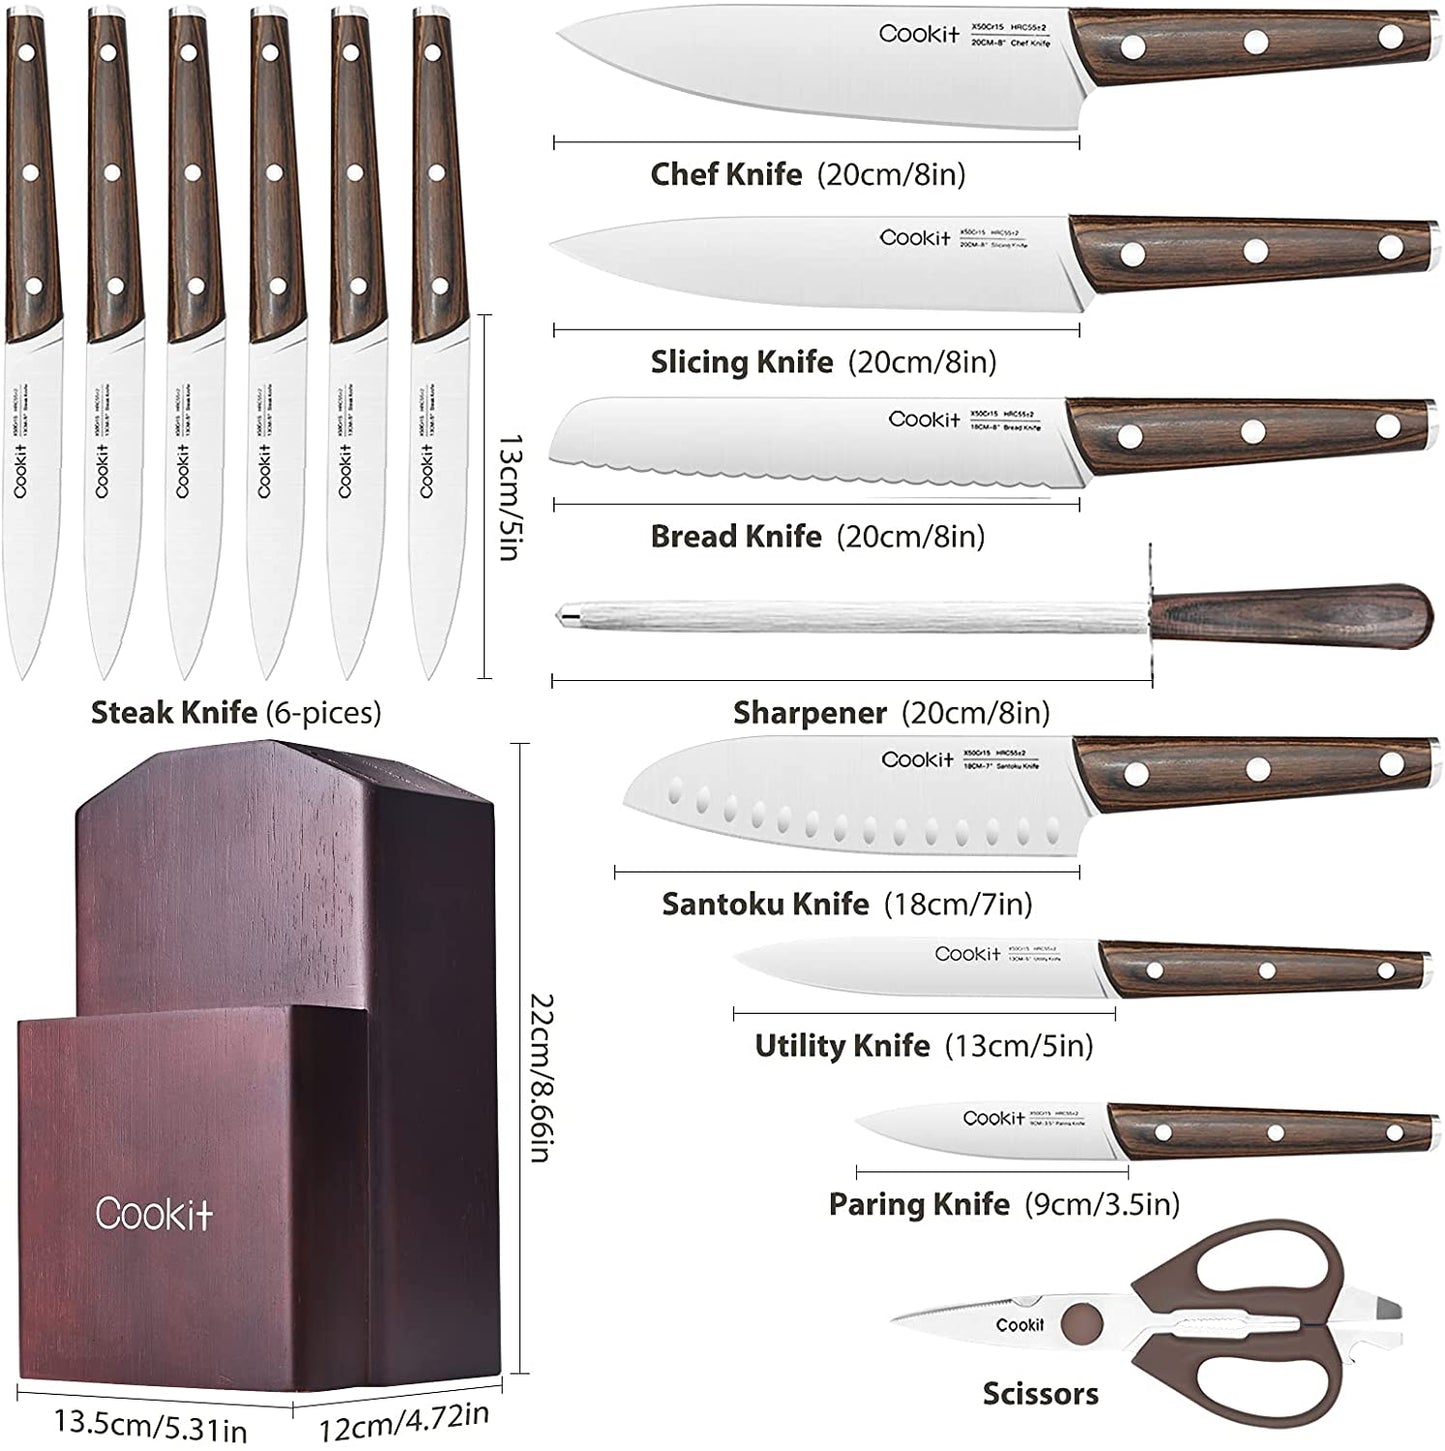 15-Piece Kitchen Knife Set with Block, Stainless Steel Knives